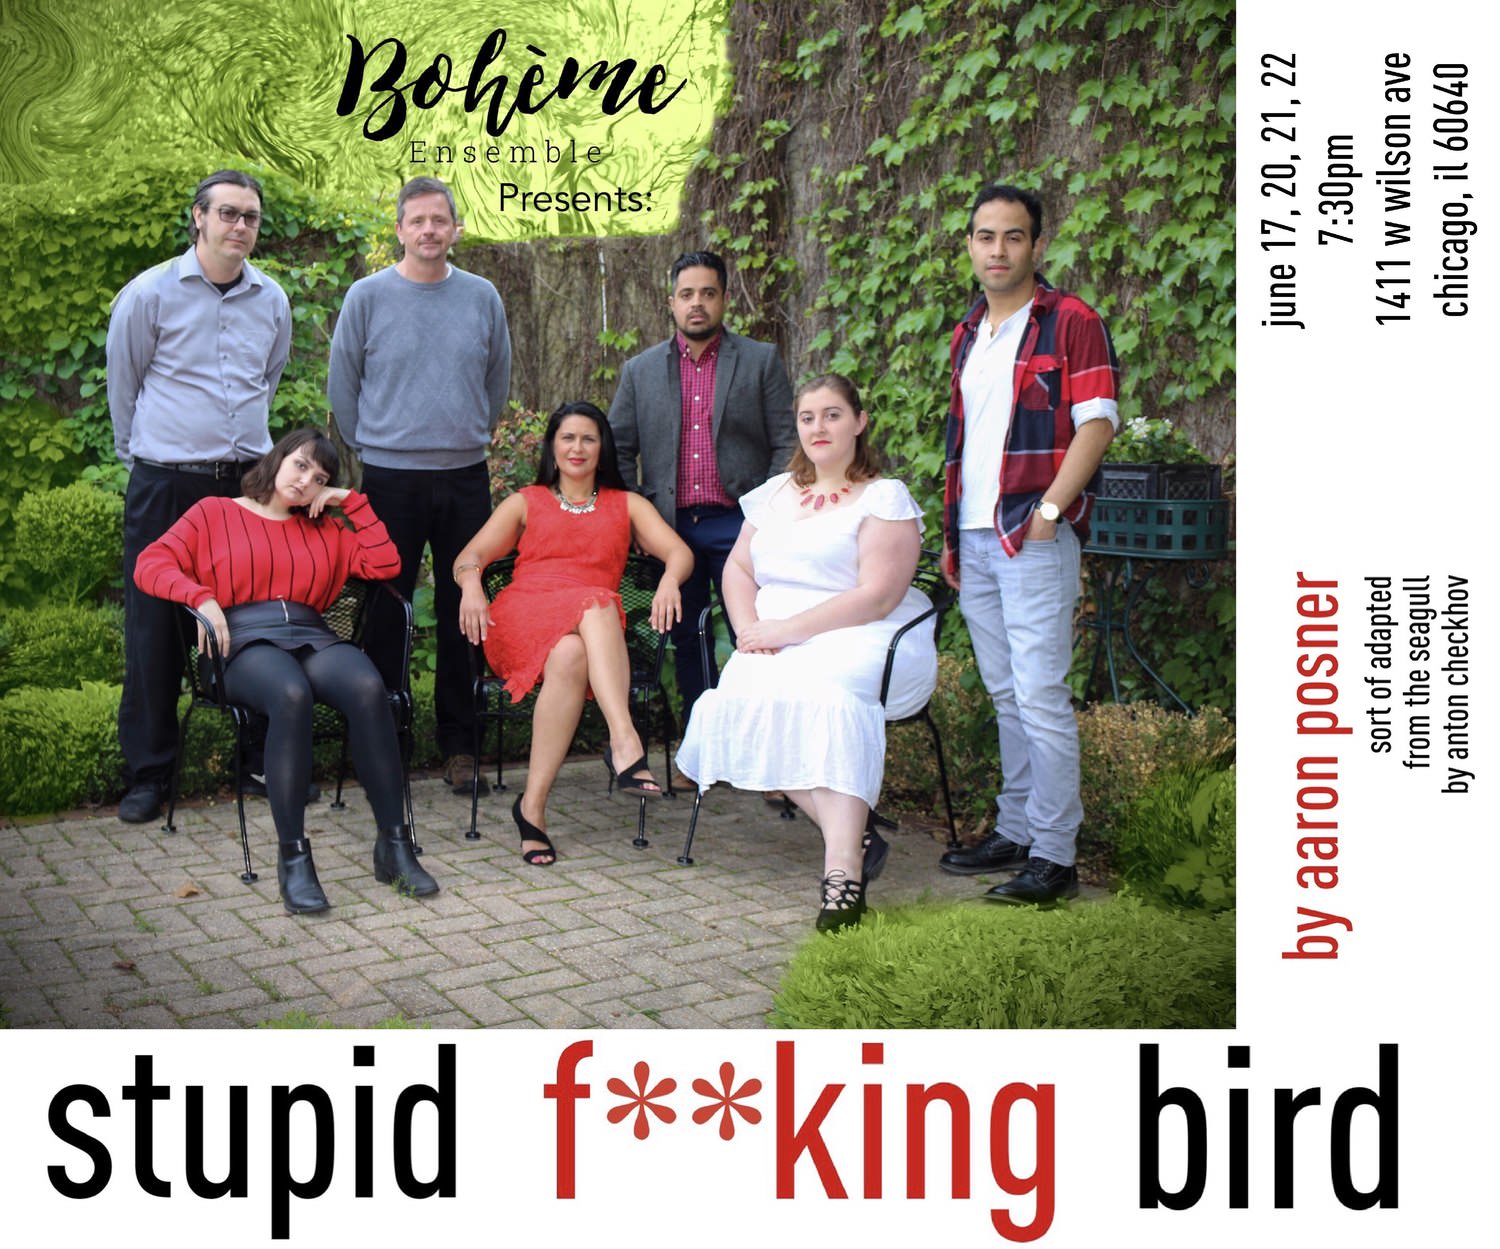 Boh me Ensemble presents Stupid F**king Bird by Aaron Posner, sort of adapted from The Seagull by Anton Chekov. June 17- June 22 at The Wilson Space (1411 W Wilson, Chicago, IL). 1